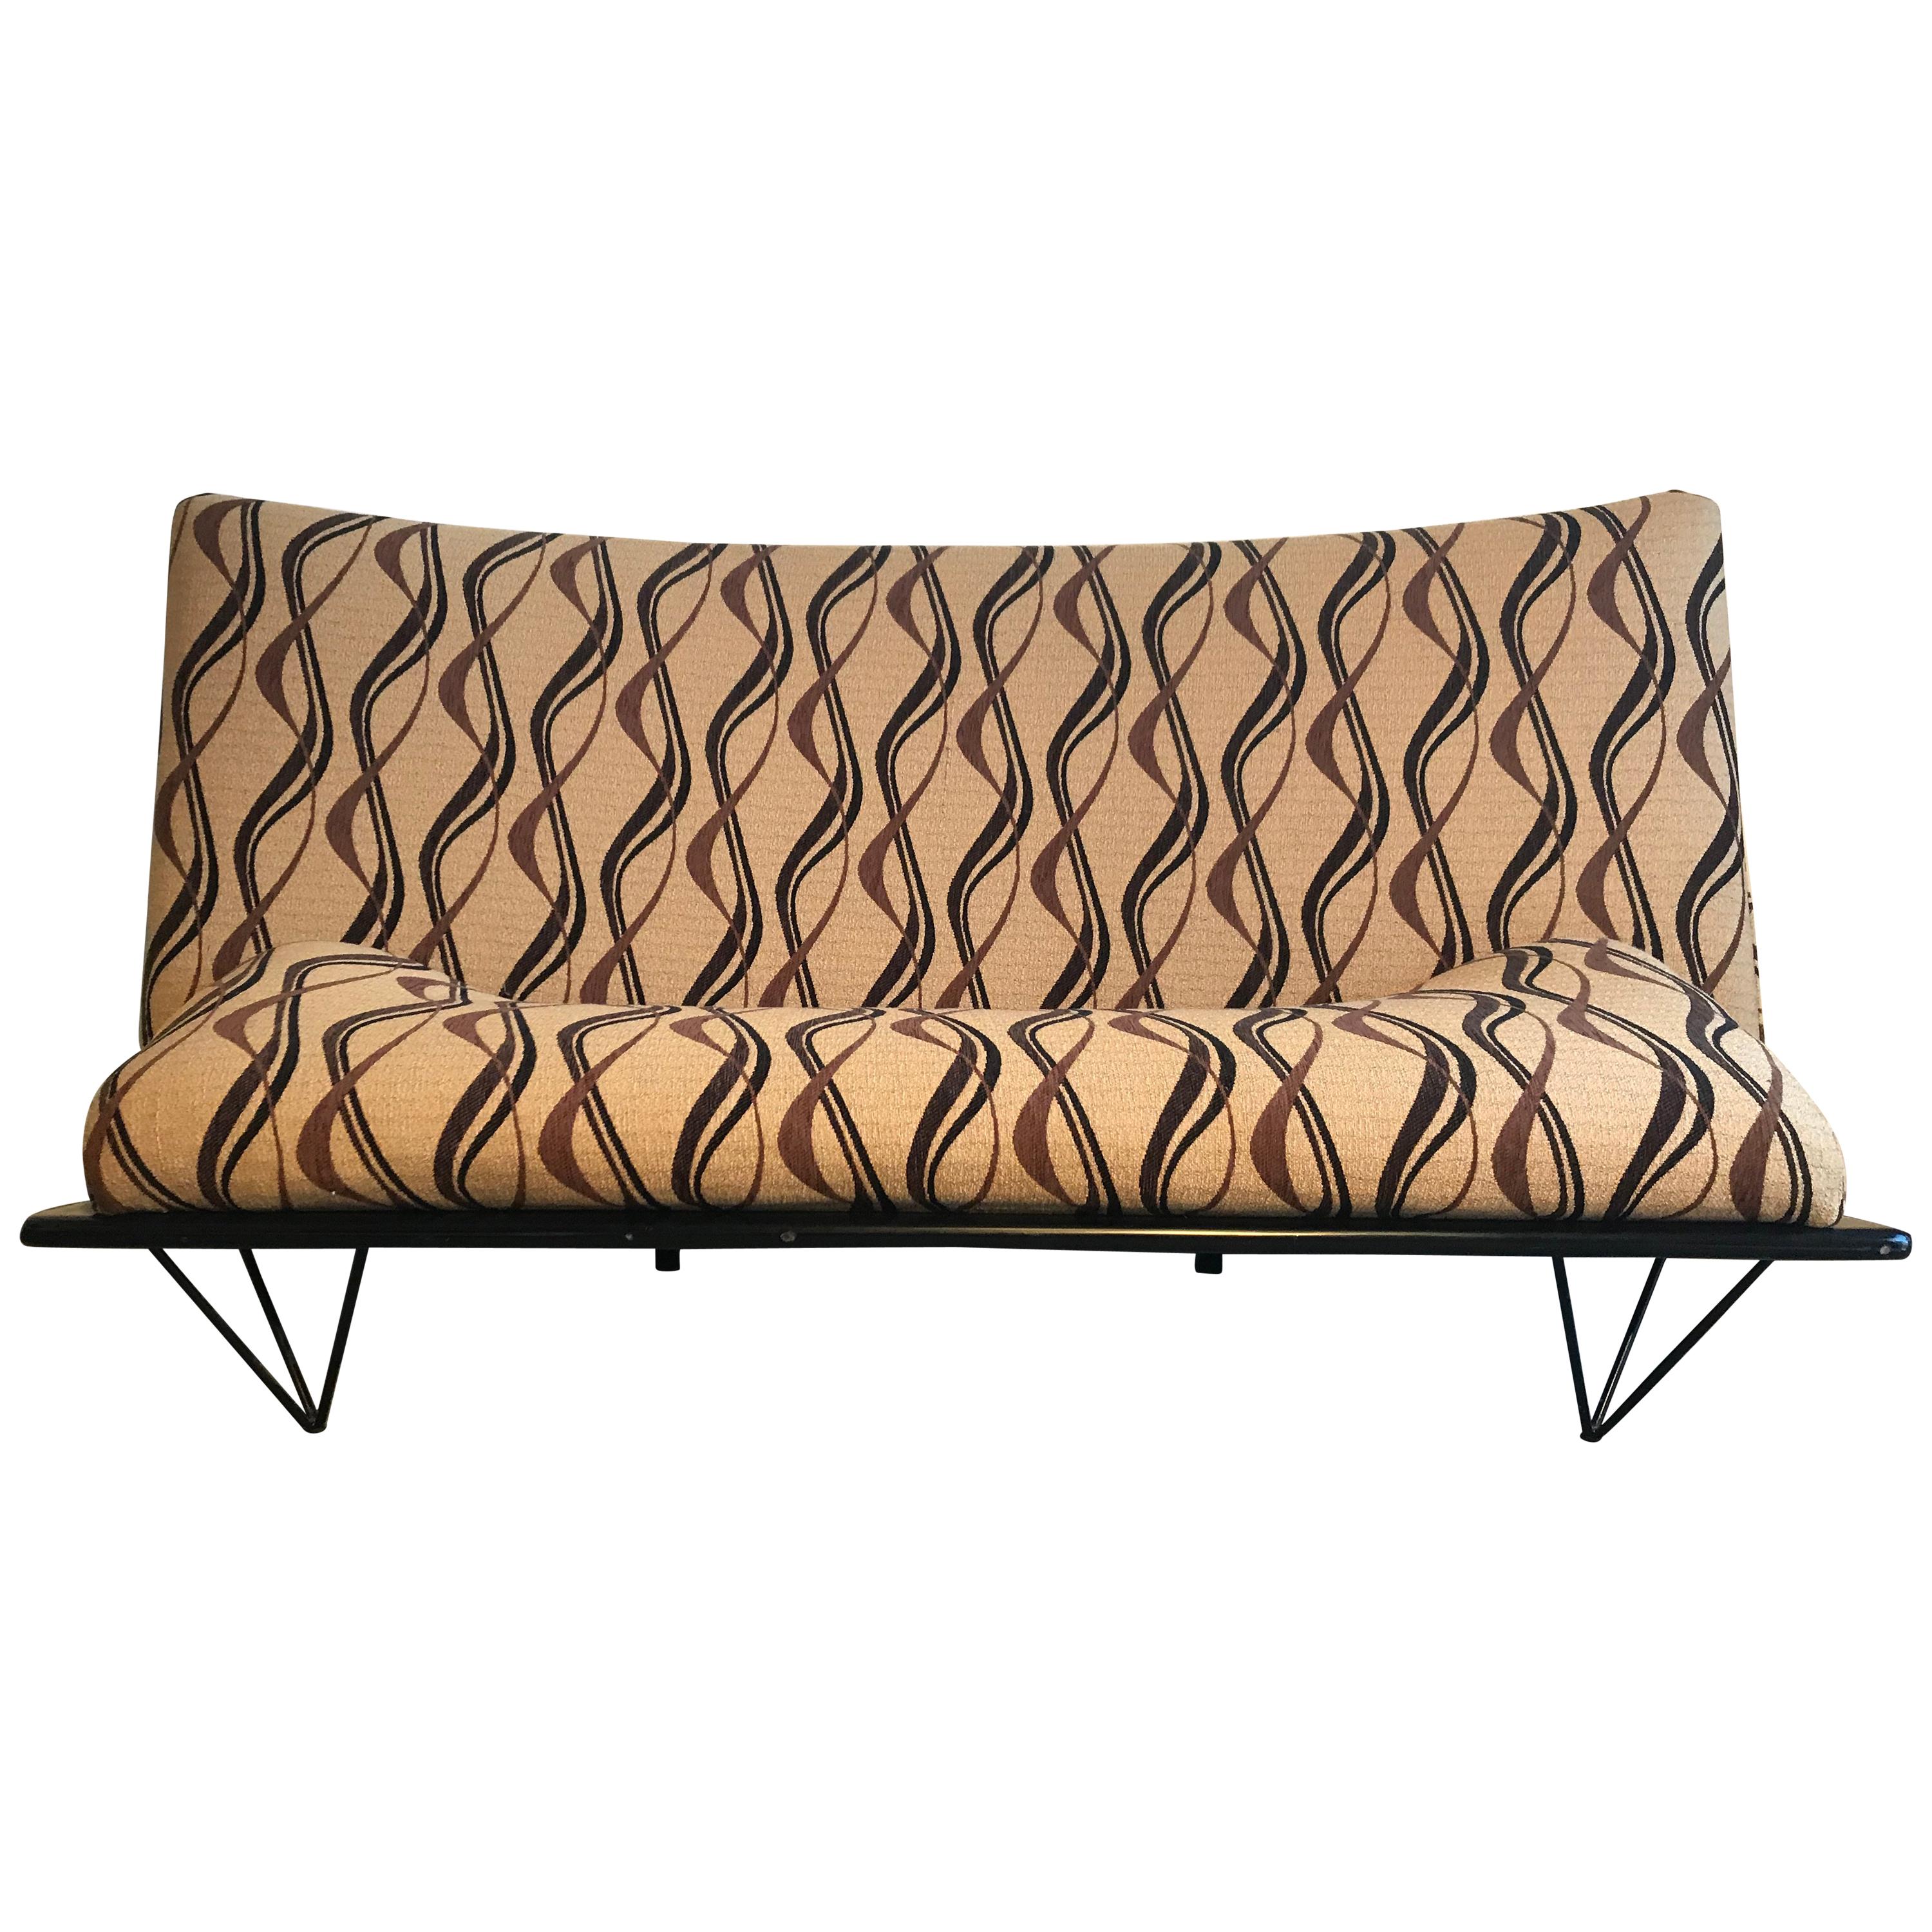 “Squash” Brown Sofa by Paolo Deganello for Driade For Sale